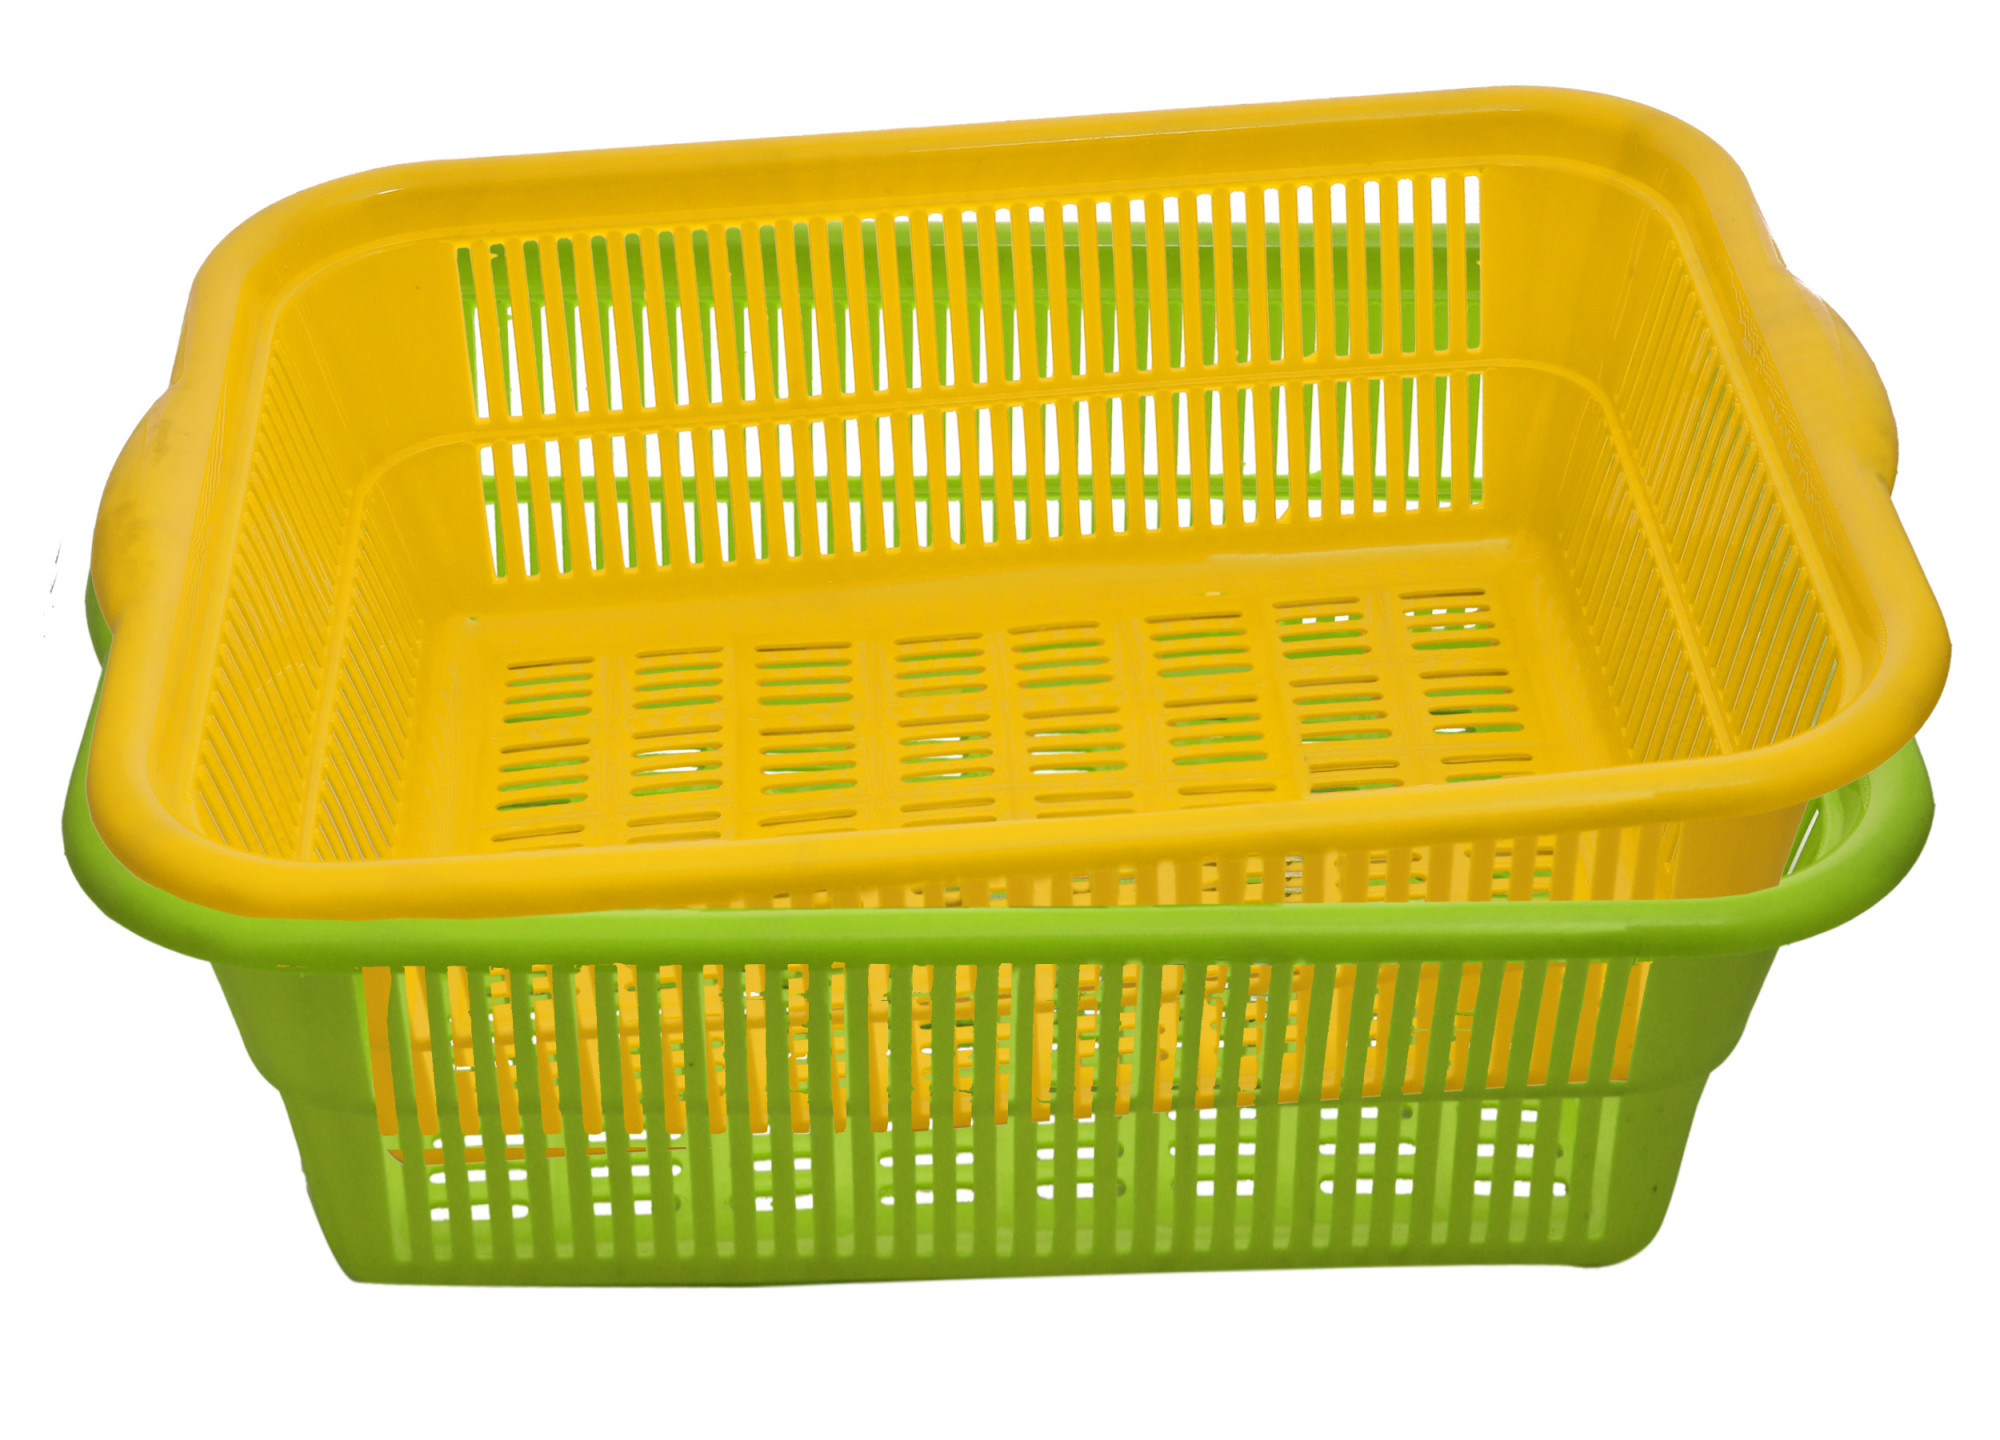 Kuber Industries Plastic Kitchen Dish Rack Drainer Vegetables And Fruits Basket Dish Rack Multipurpose Organizers ,Small Size,Green & Yellow